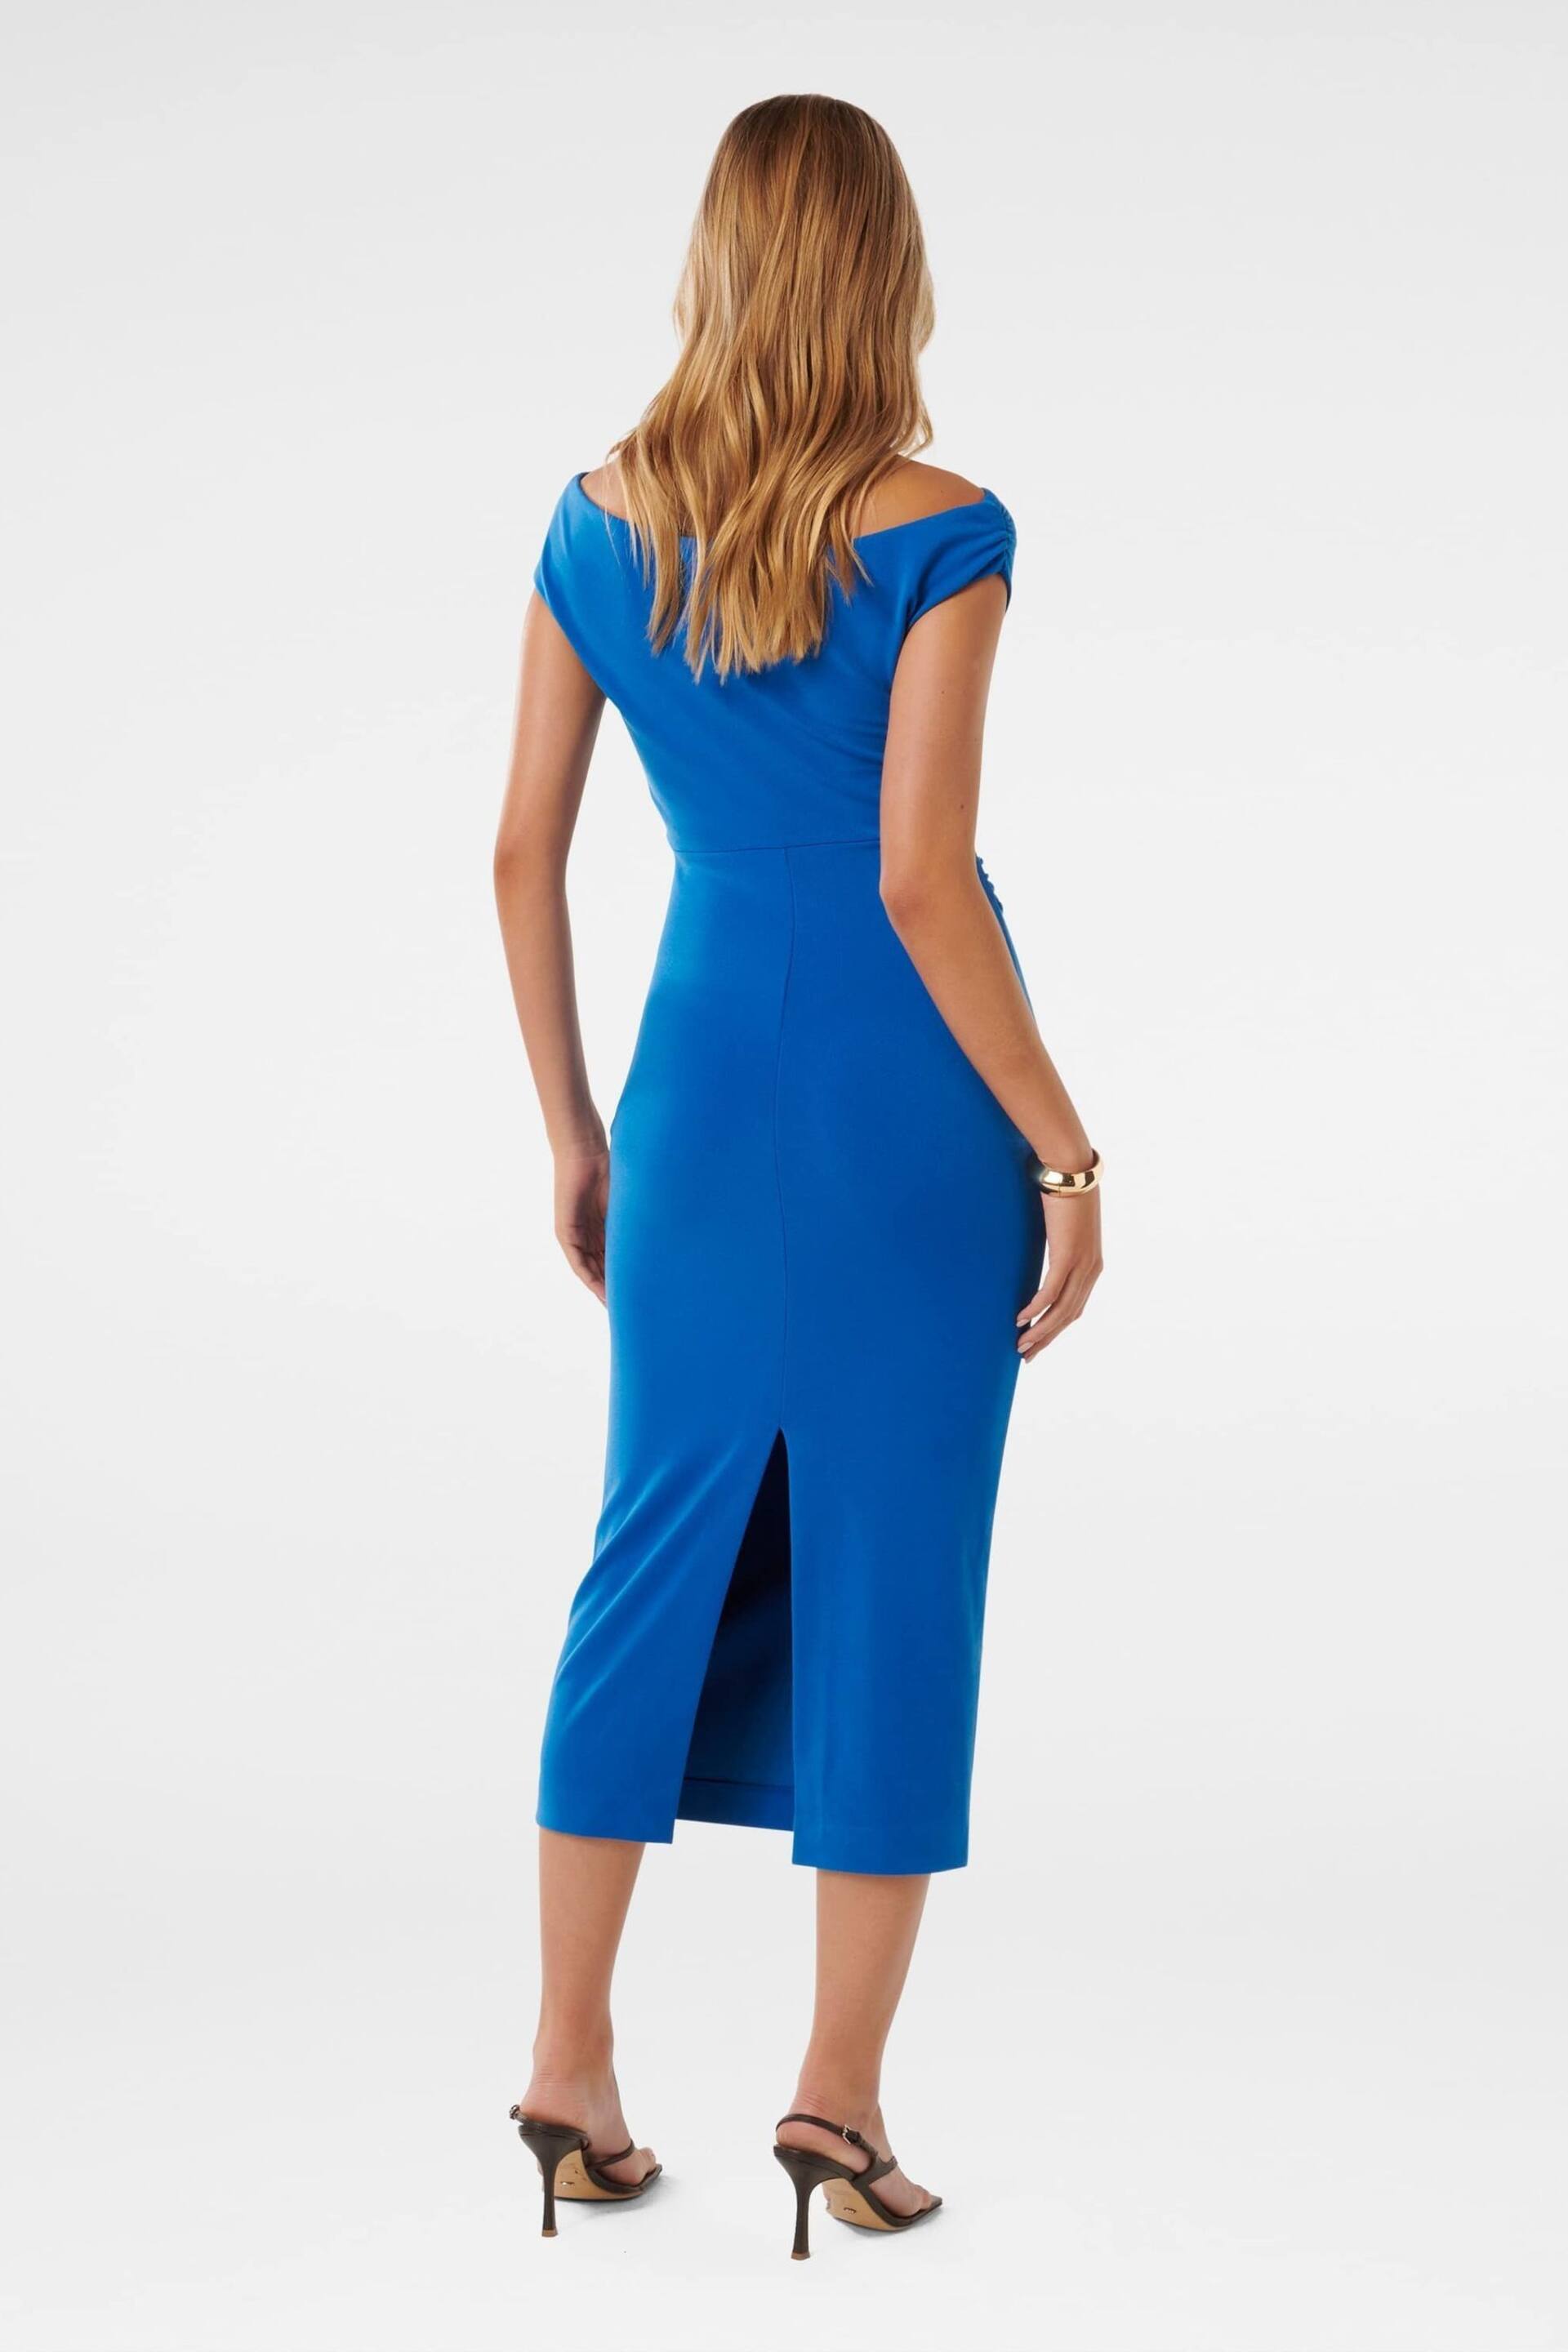 Forever New Blue Alexa Tipped Shoulder Bodycon Midi Dress - Image 4 of 4